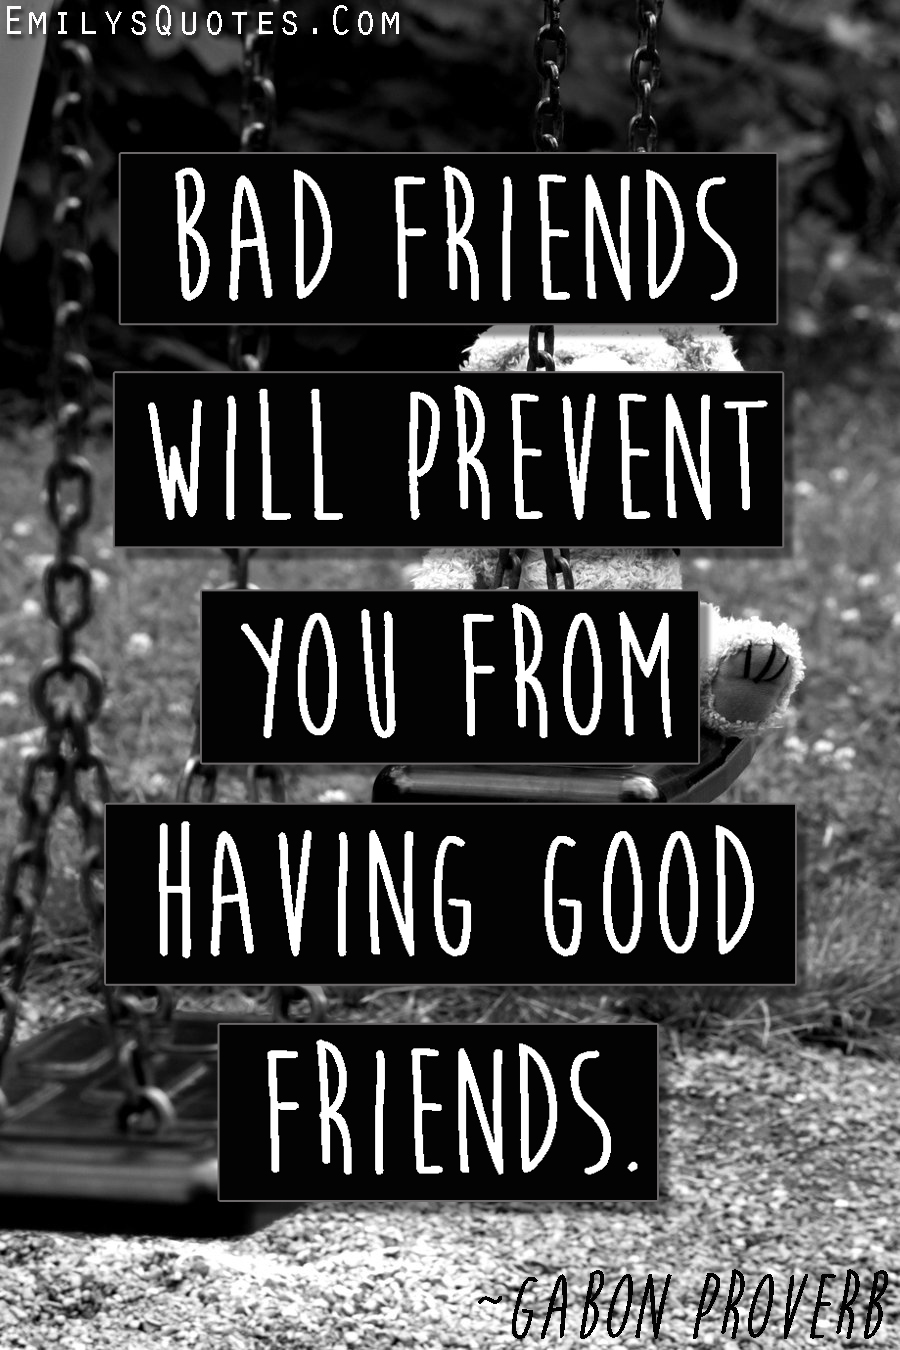 Bad friends will prevent you from having good friends